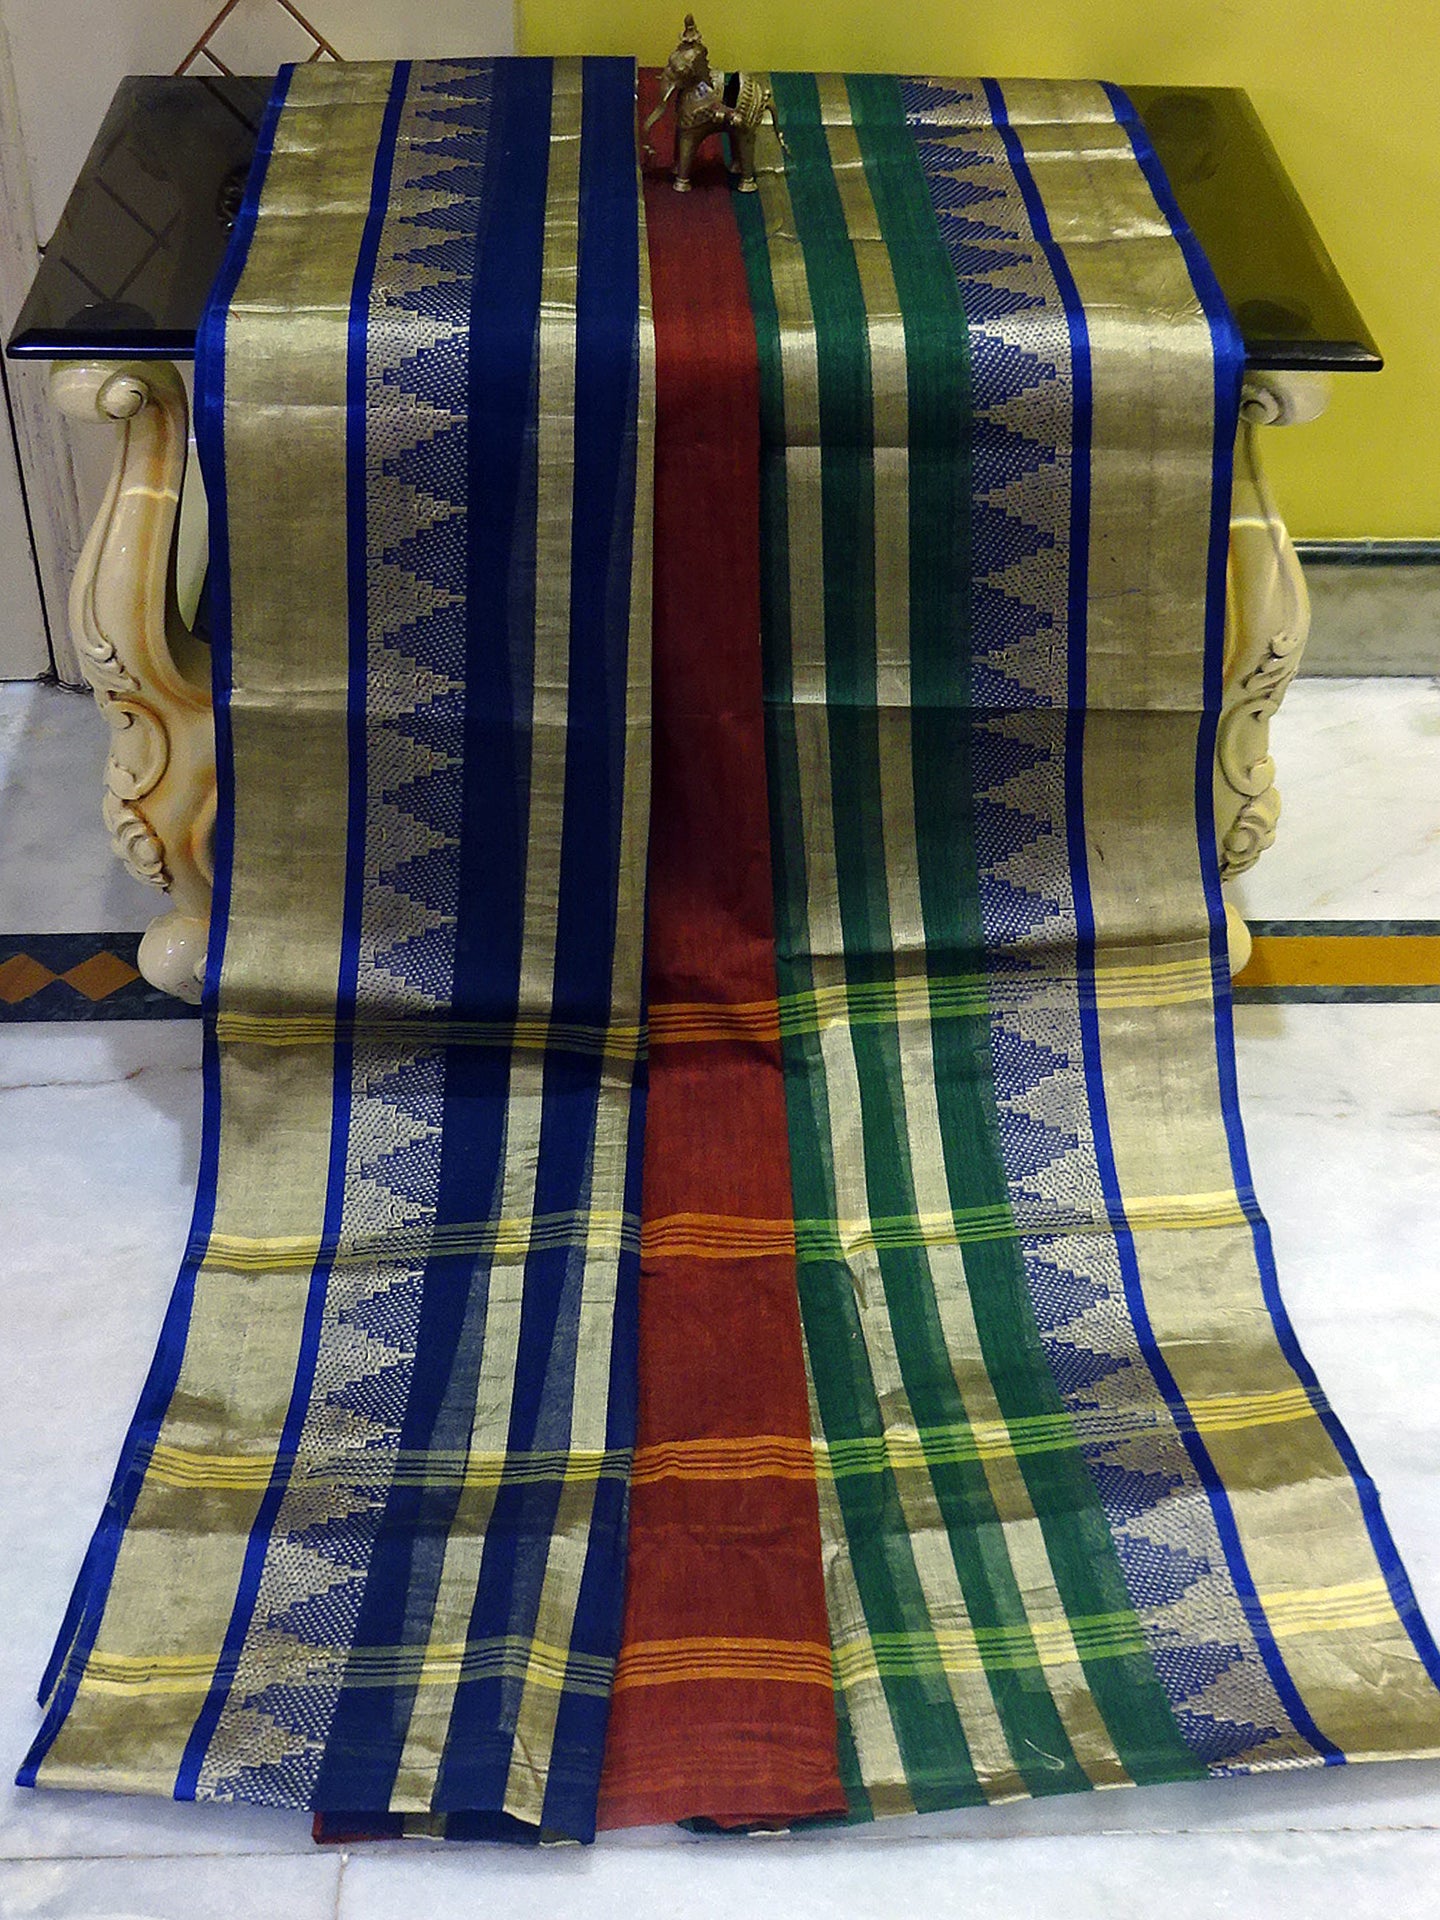 Temple Border Tangail Cotton Saree in Burnt Orange, Dark Green and Navy Blue with Stripes